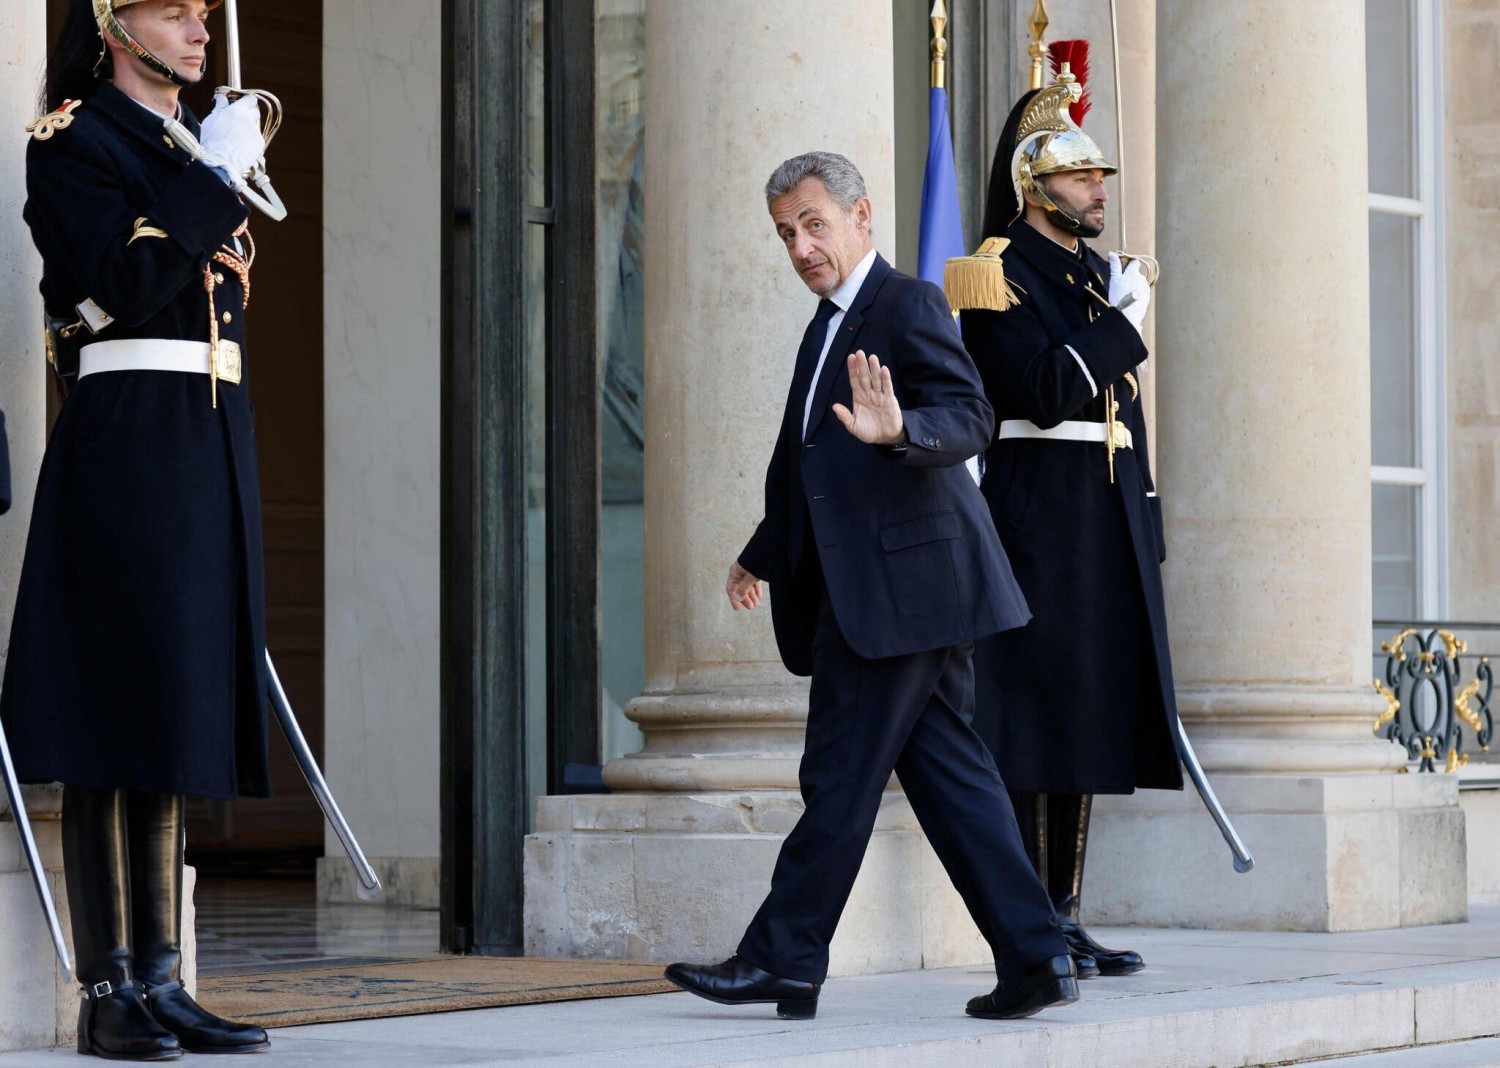 Former President Nicolas Sarkozy of France arriving for a meeting on the Russian attack of Ukraine in Paris in February 2022.Credit...Ludovic Marin/Agence France-Presse — Getty Images